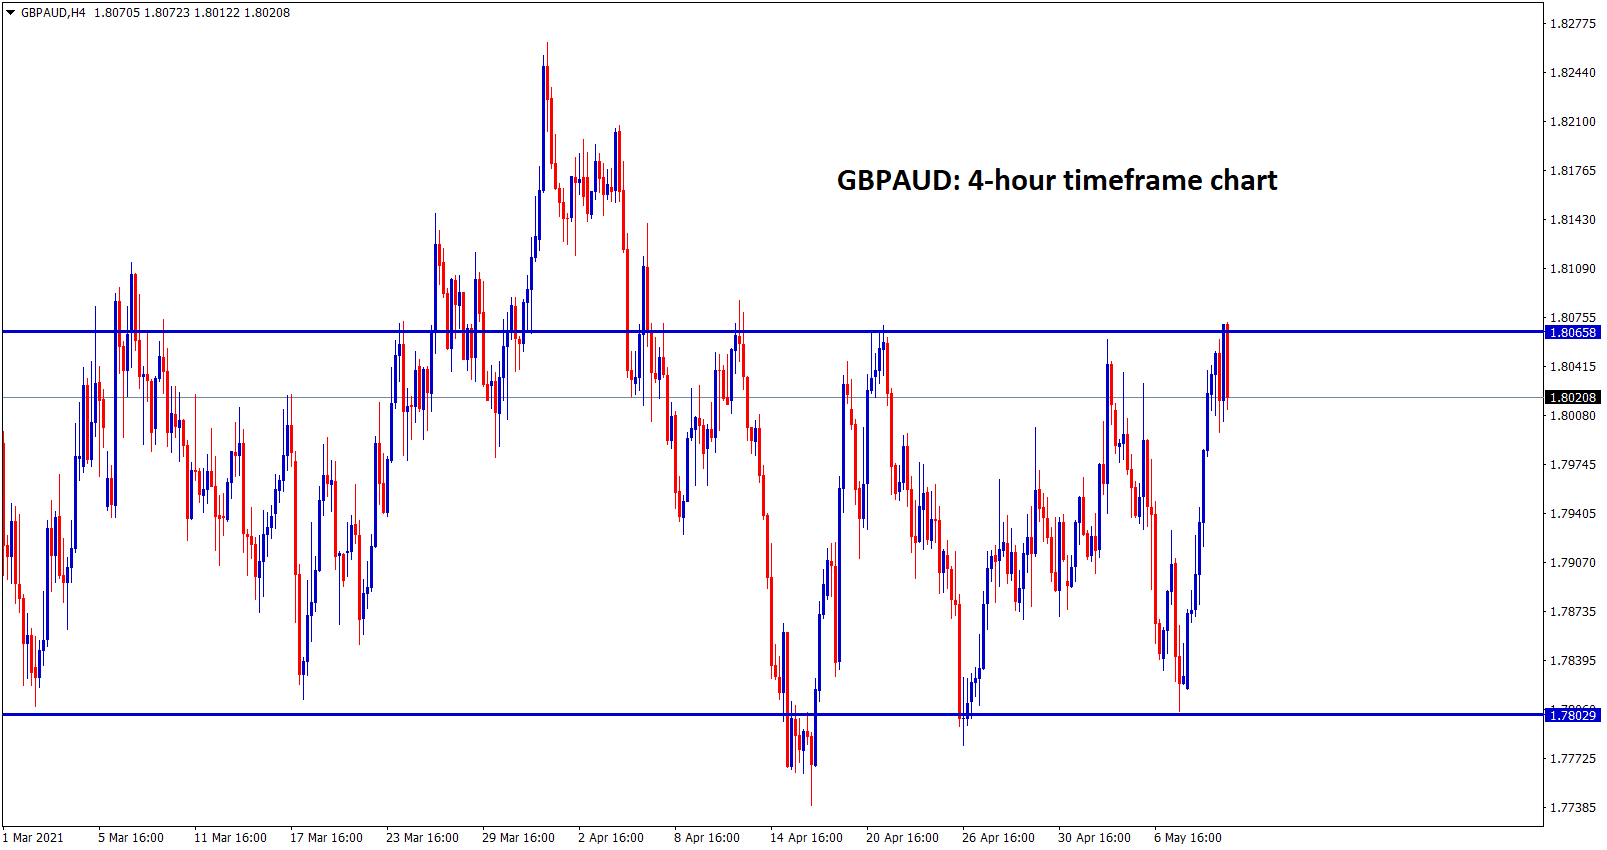 GBPAUD moving up and down between the resistance and support